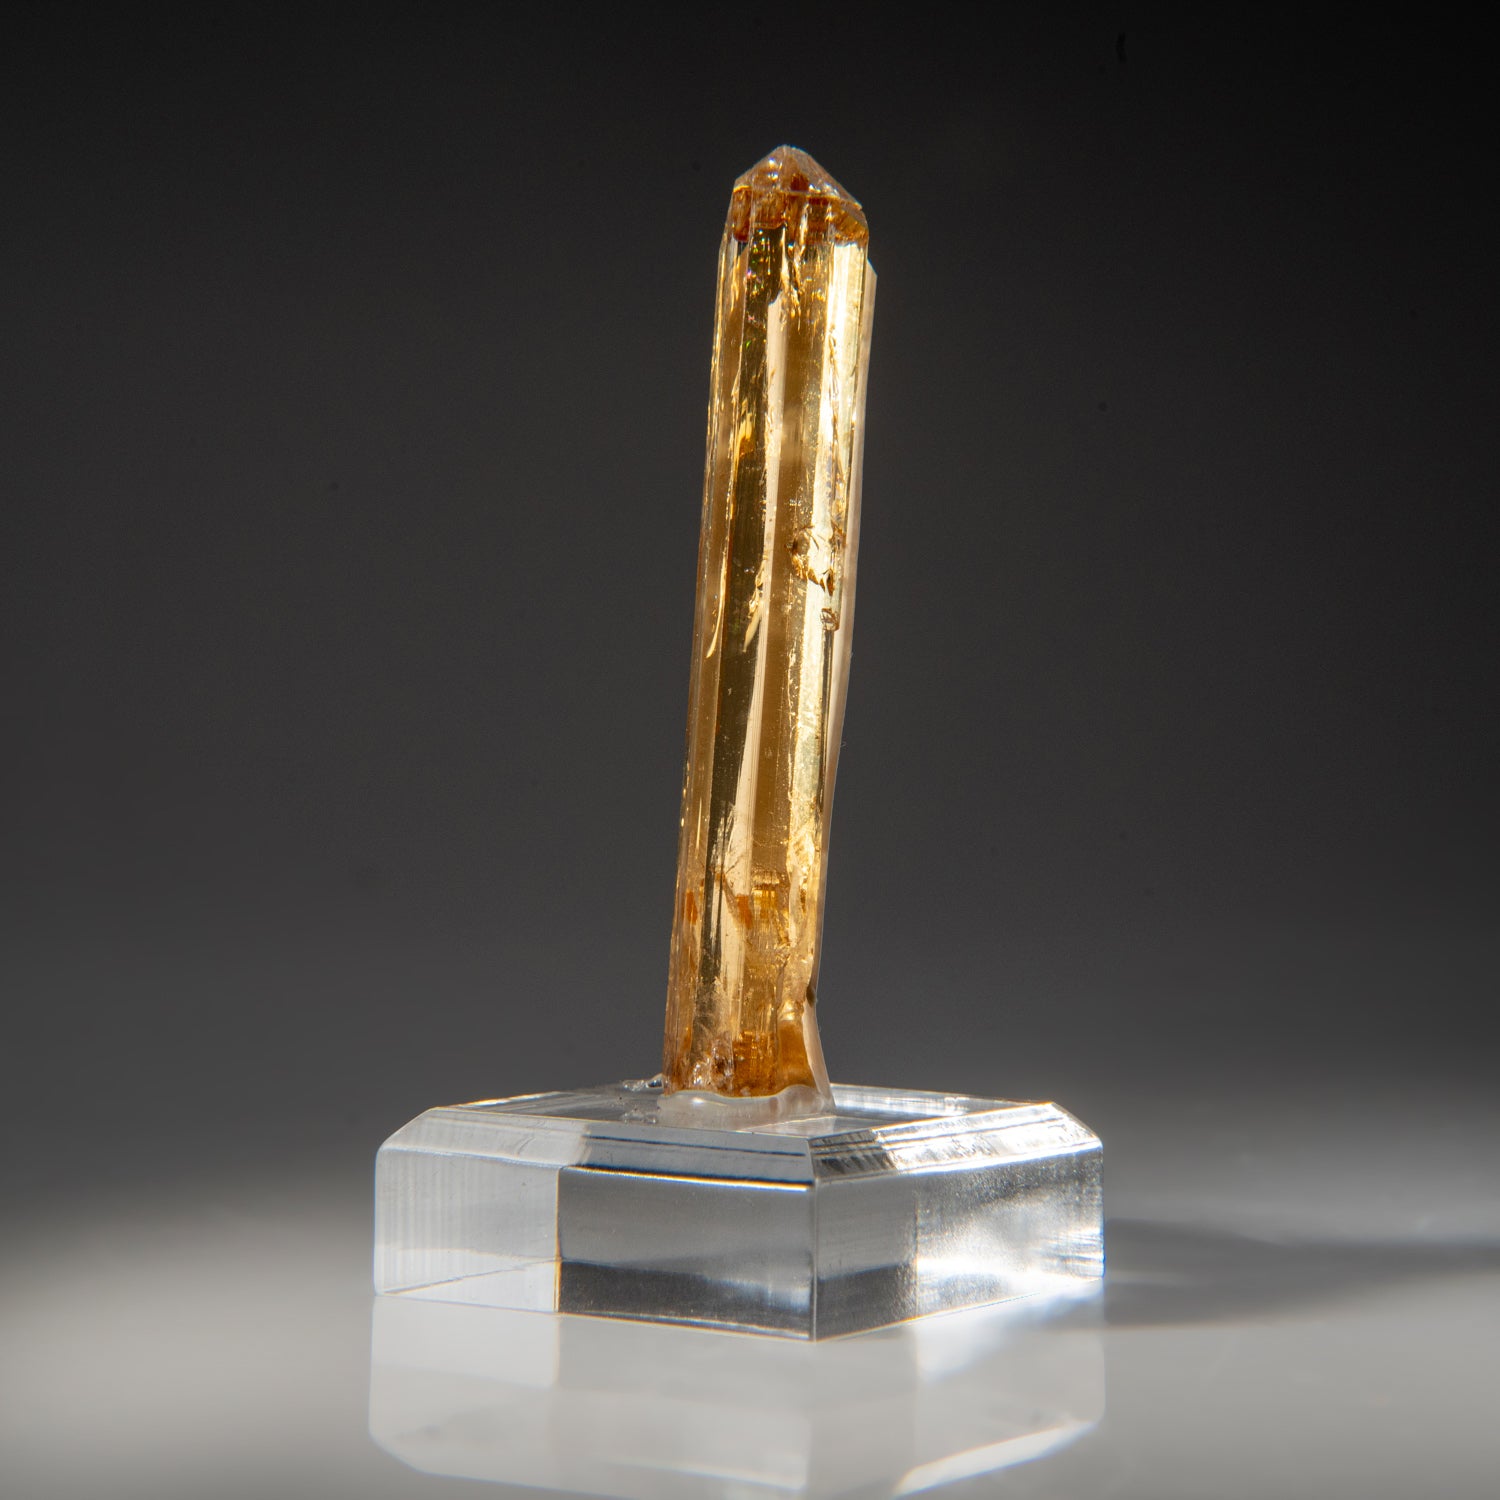 Imperial Topaz from Kunar, Afghanistan